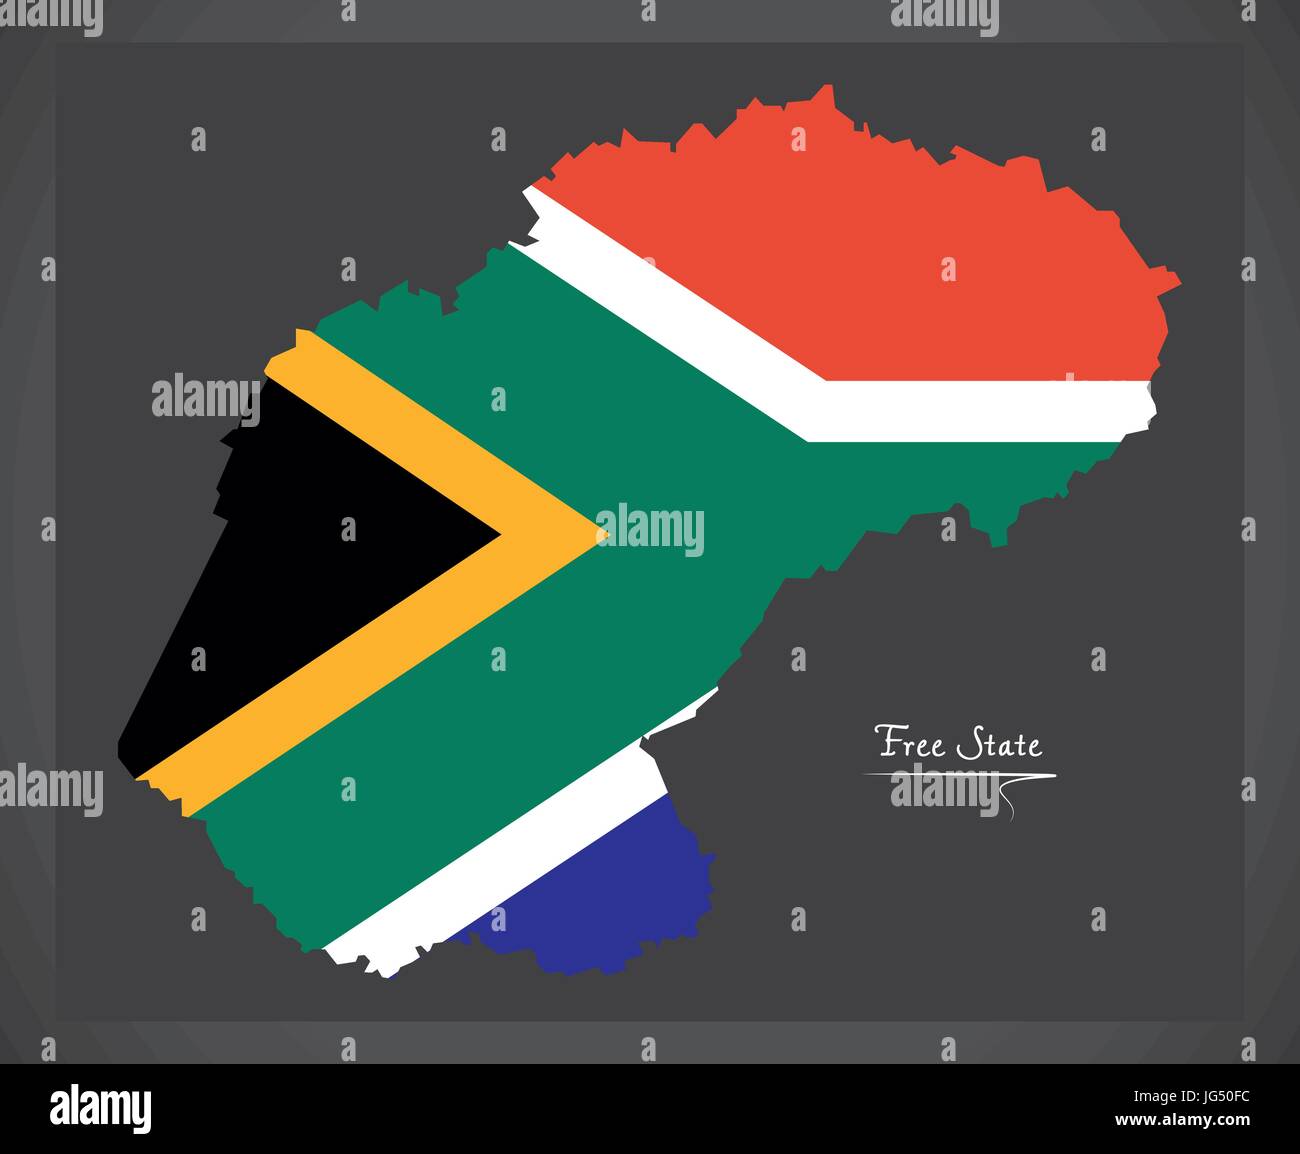 Free State South Africa map with national flag illustration Stock Vector